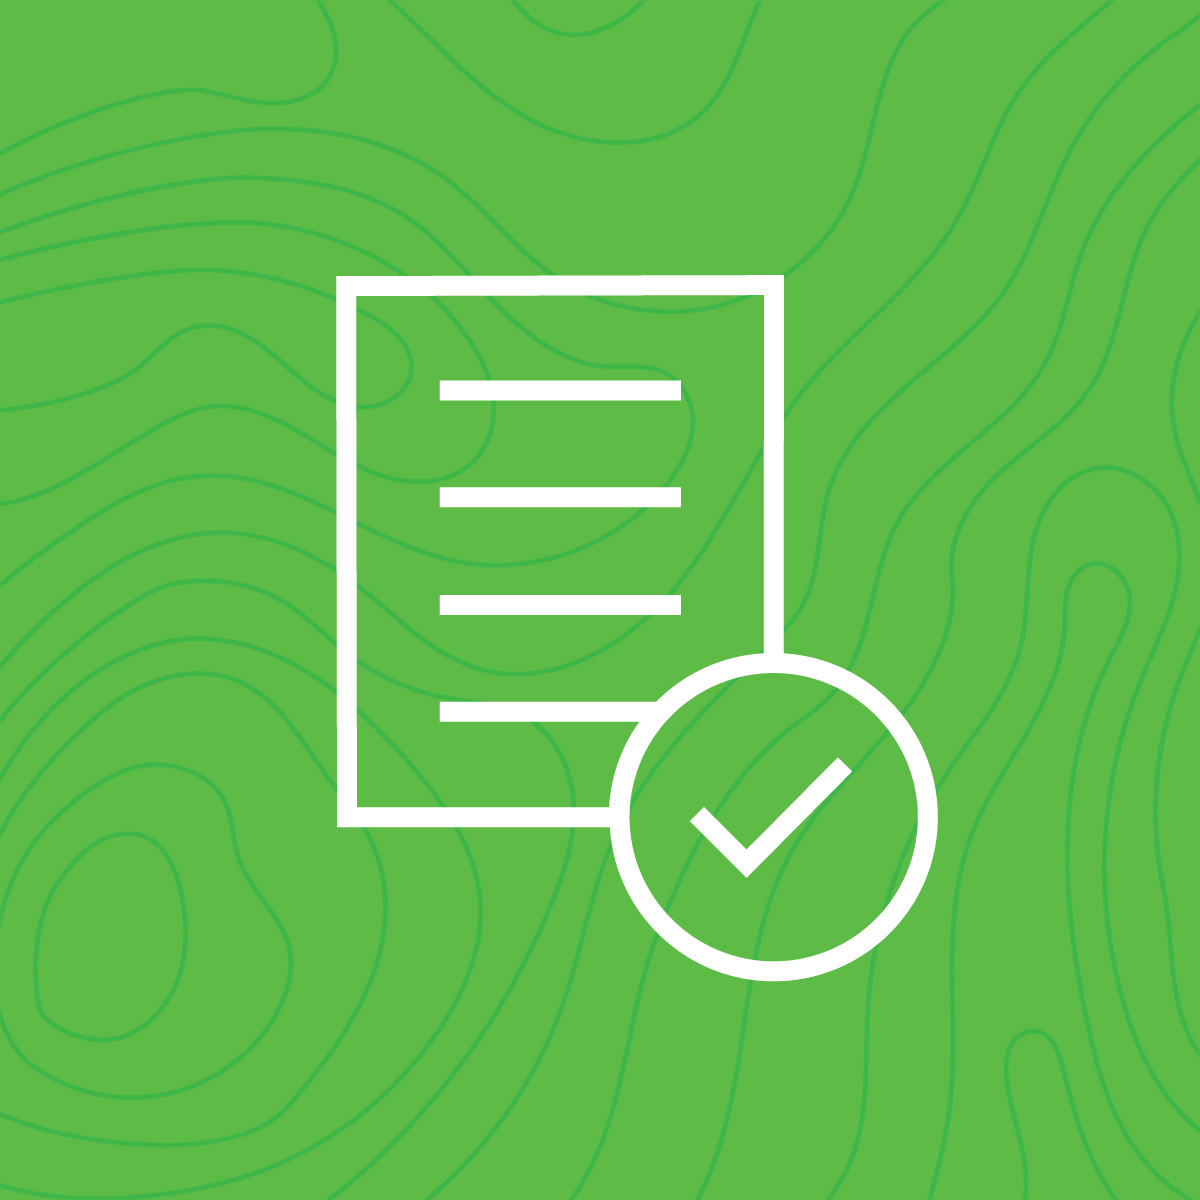 icon of list with checkmark on green background